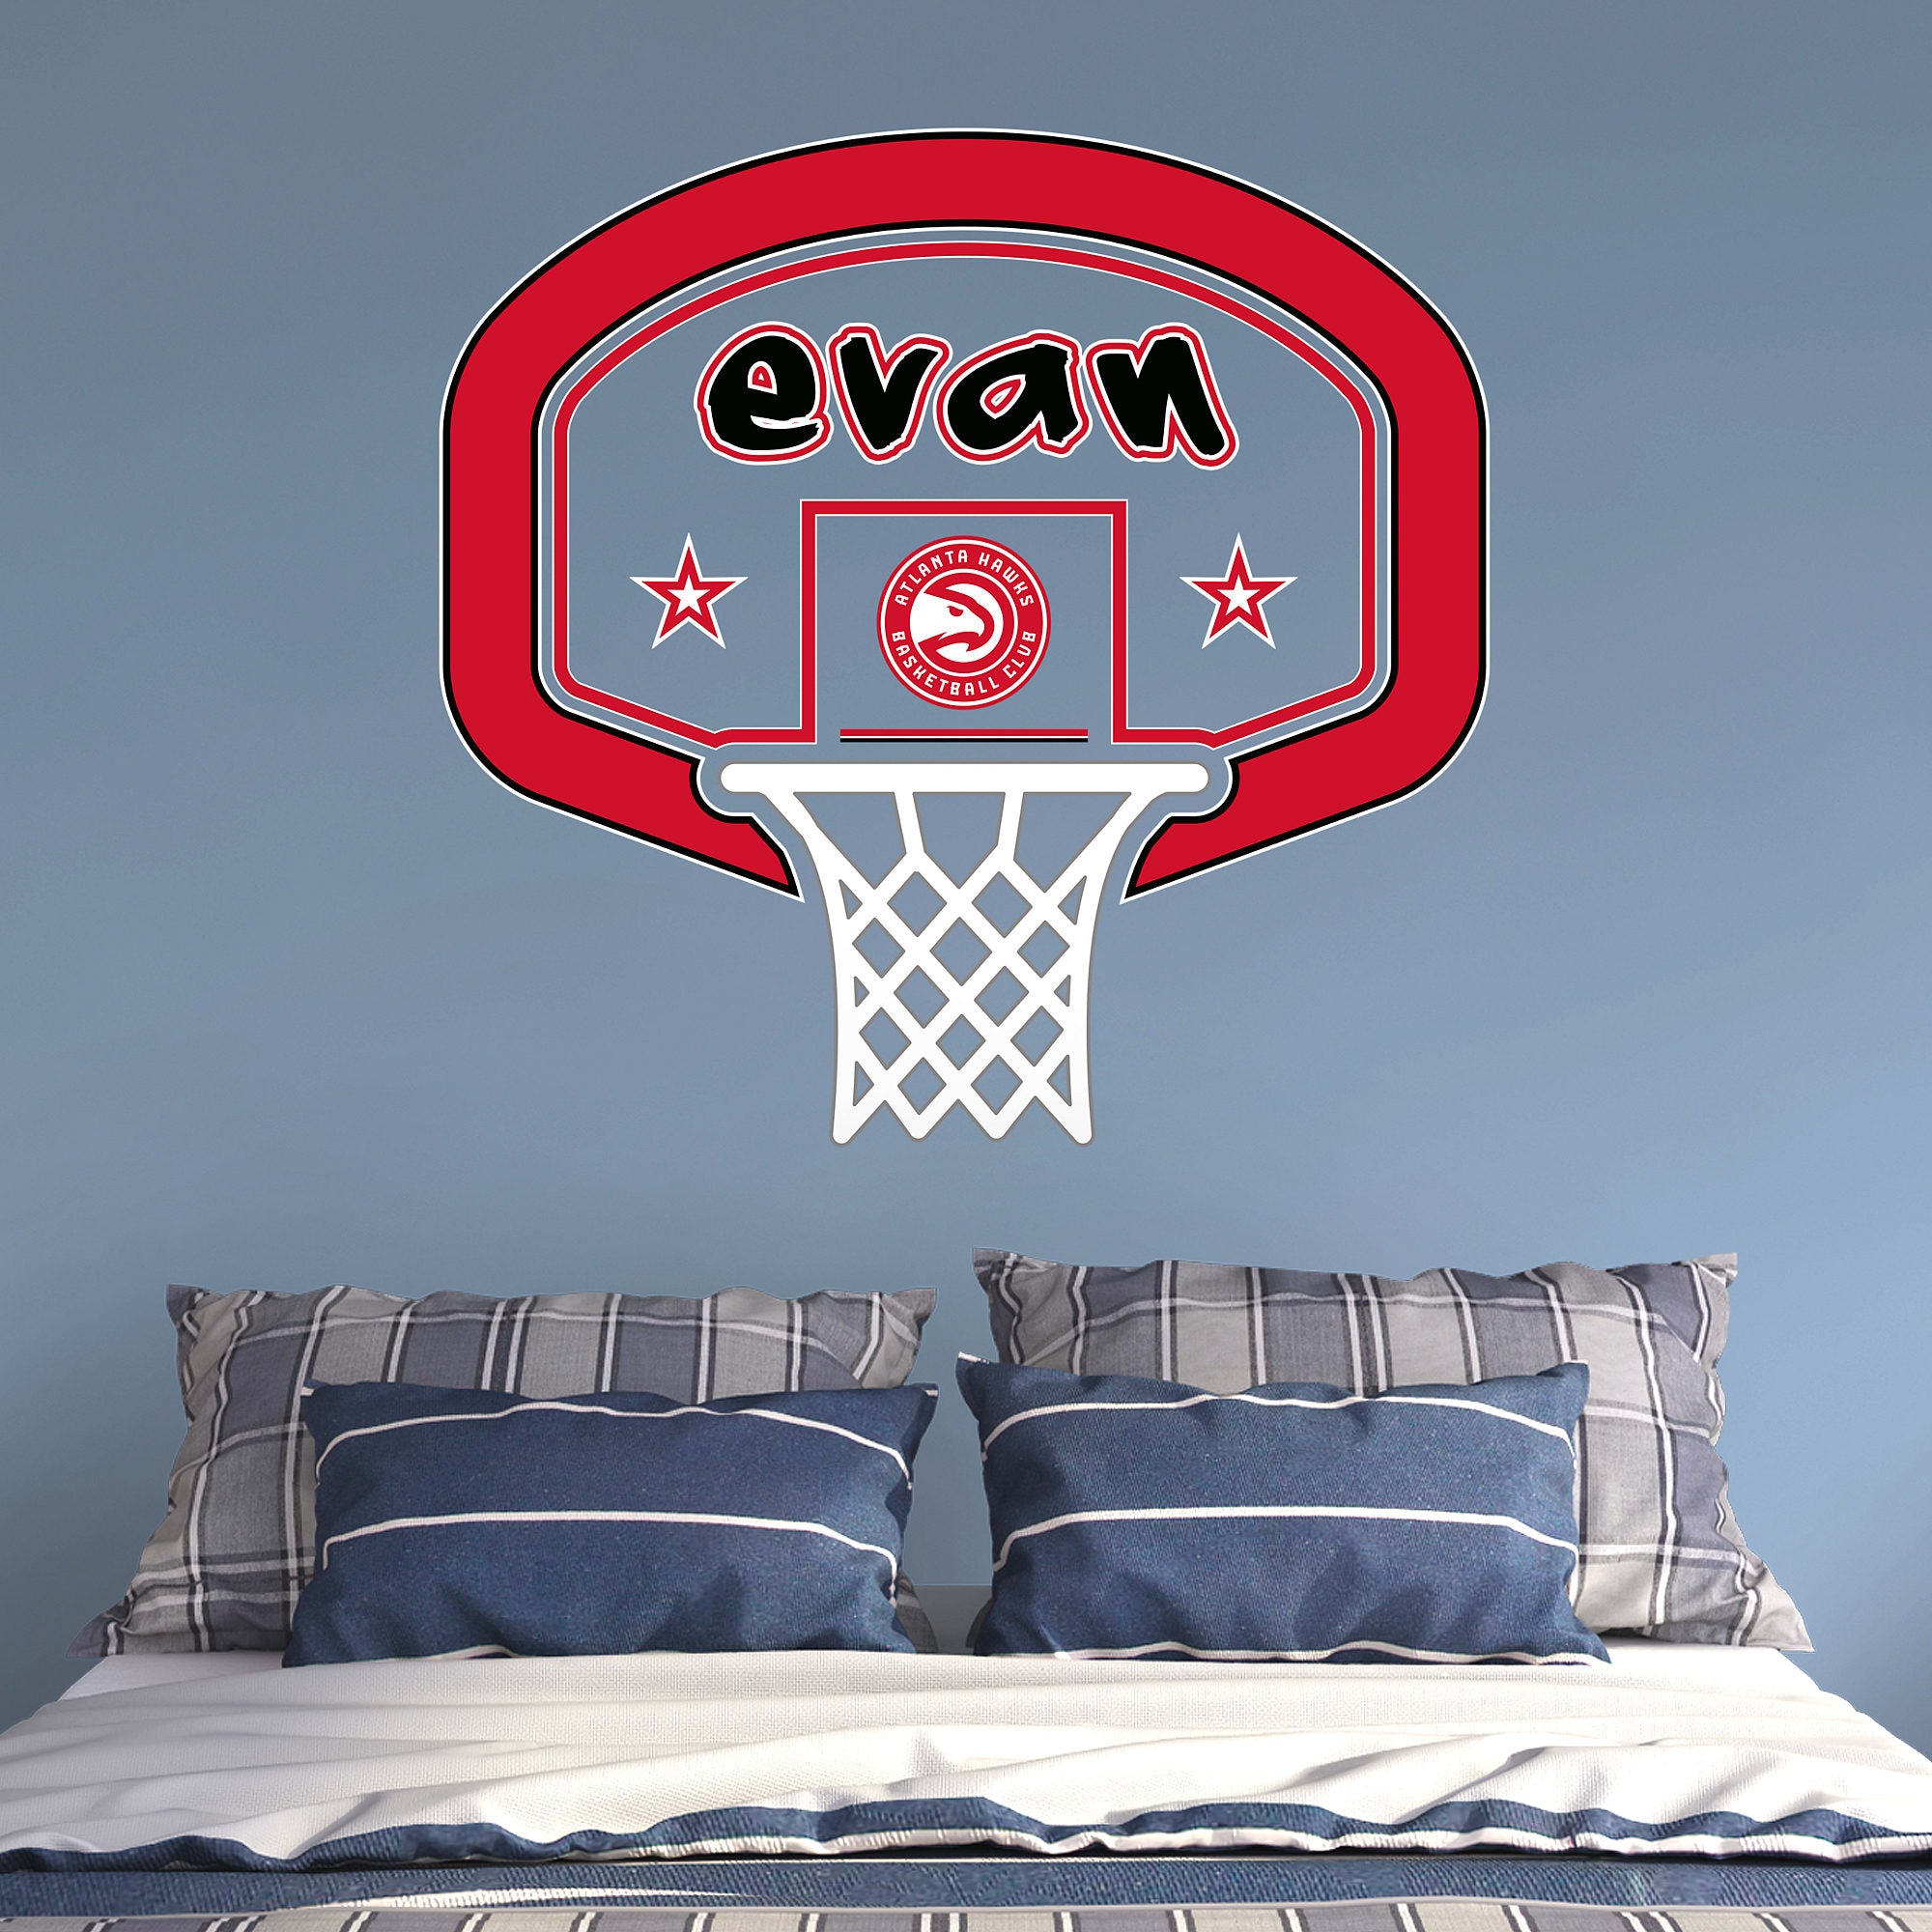 Atlanta Hawks: Personalized Name - Officially Licensed NBA Transfer Decal 52.0"W x 39.5"H by Fathead | Vinyl